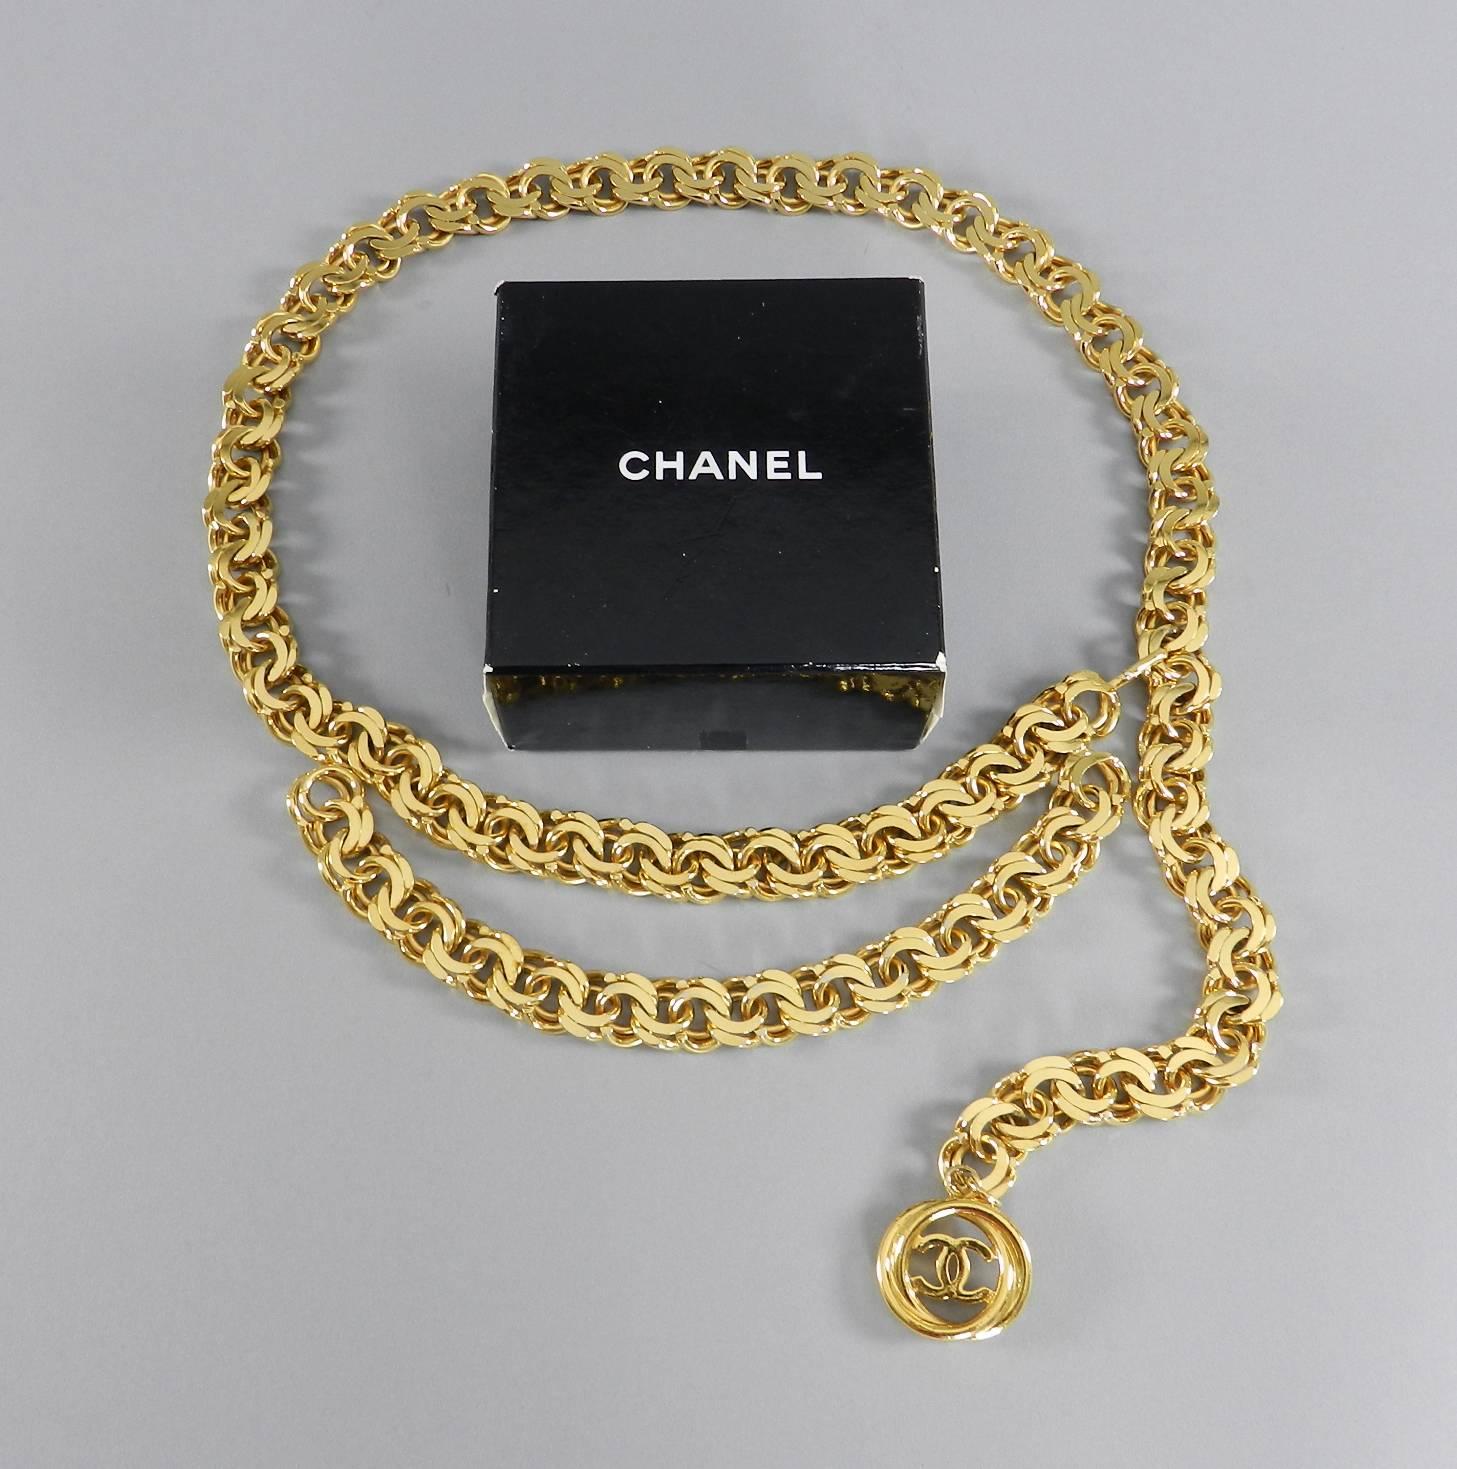 Chanel vintage spring 1987 gold chain belt. Heavy gilt chain design with CC medallion drop. Marked Chanel season 25 (spring 1987) Made in France. Comes with original box. Measures 40